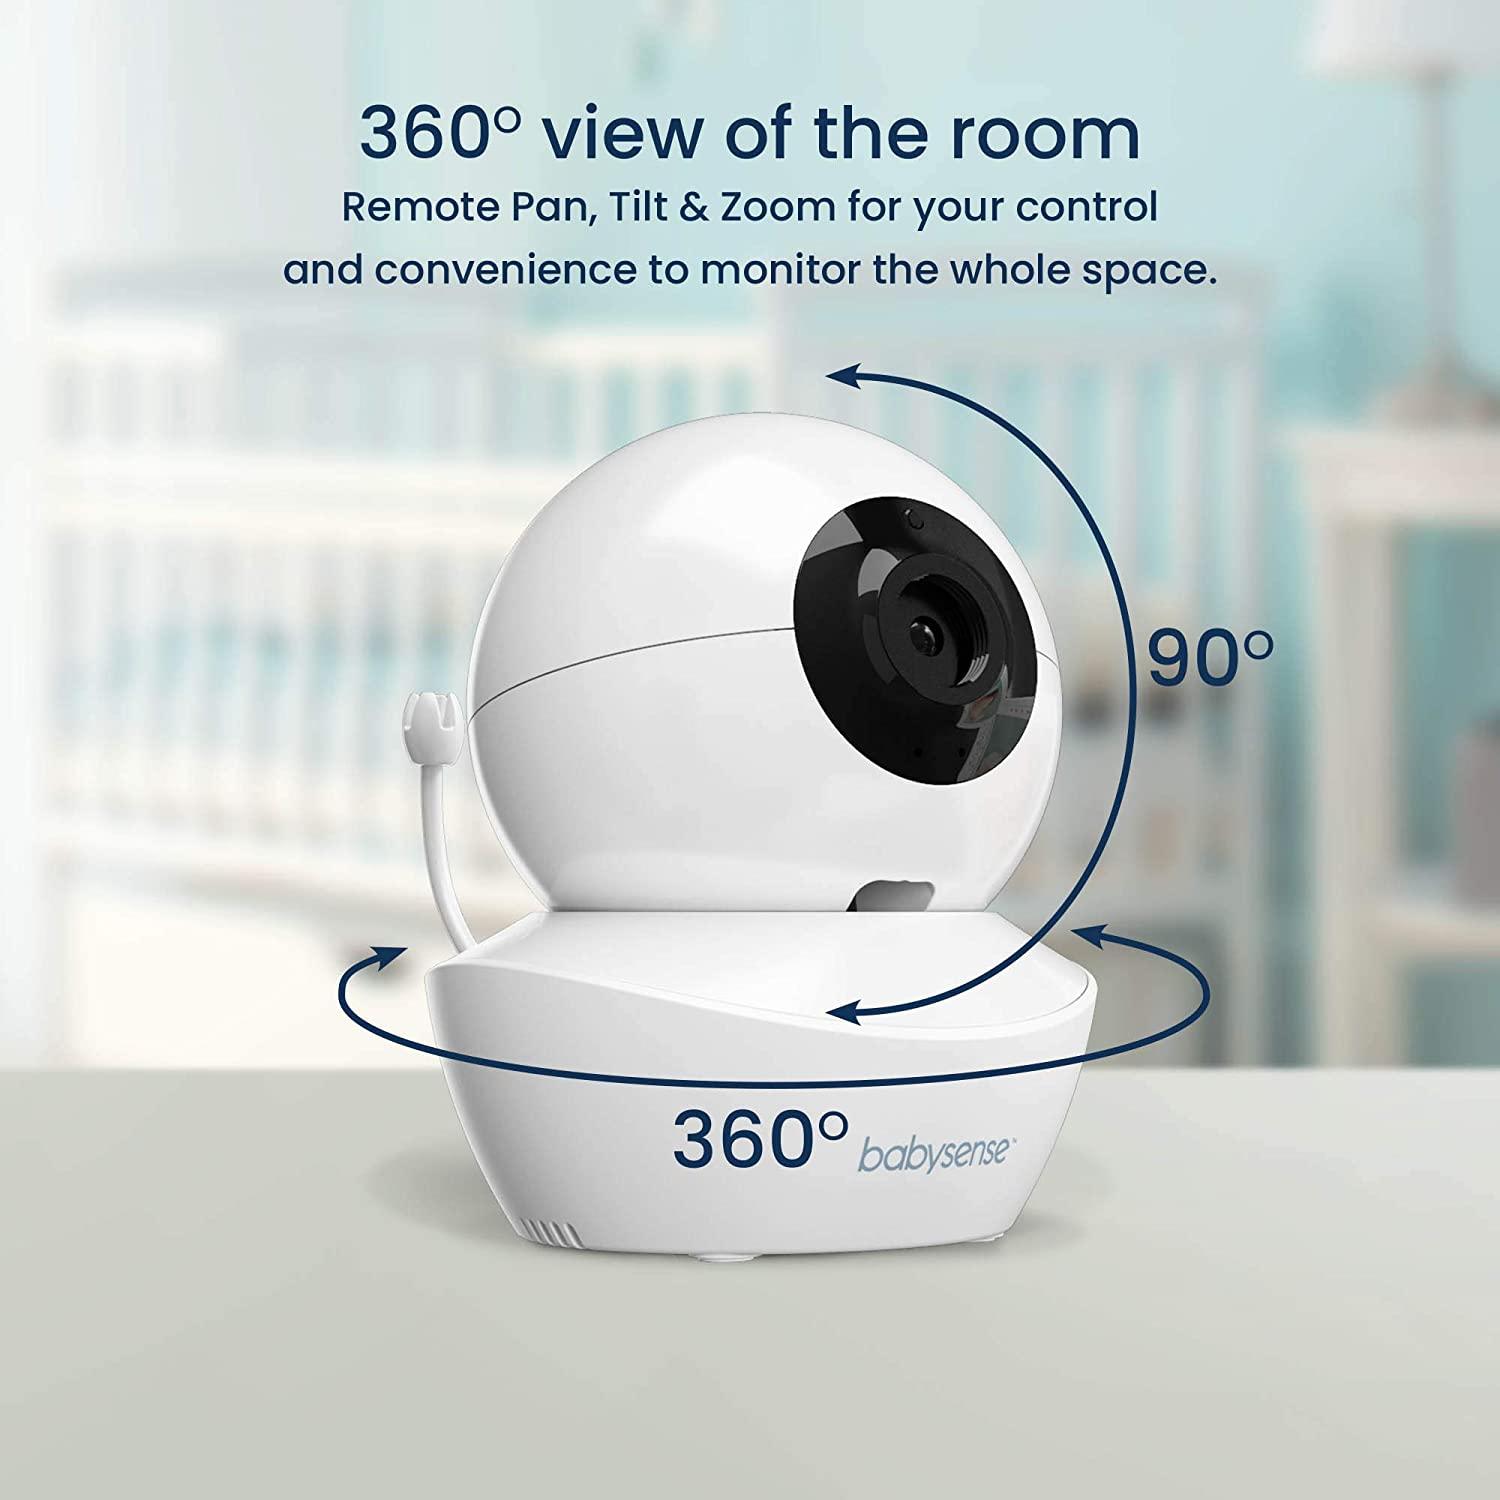 Add On Camera for Babysense Video Baby Monitor HD S2, Remote Pan